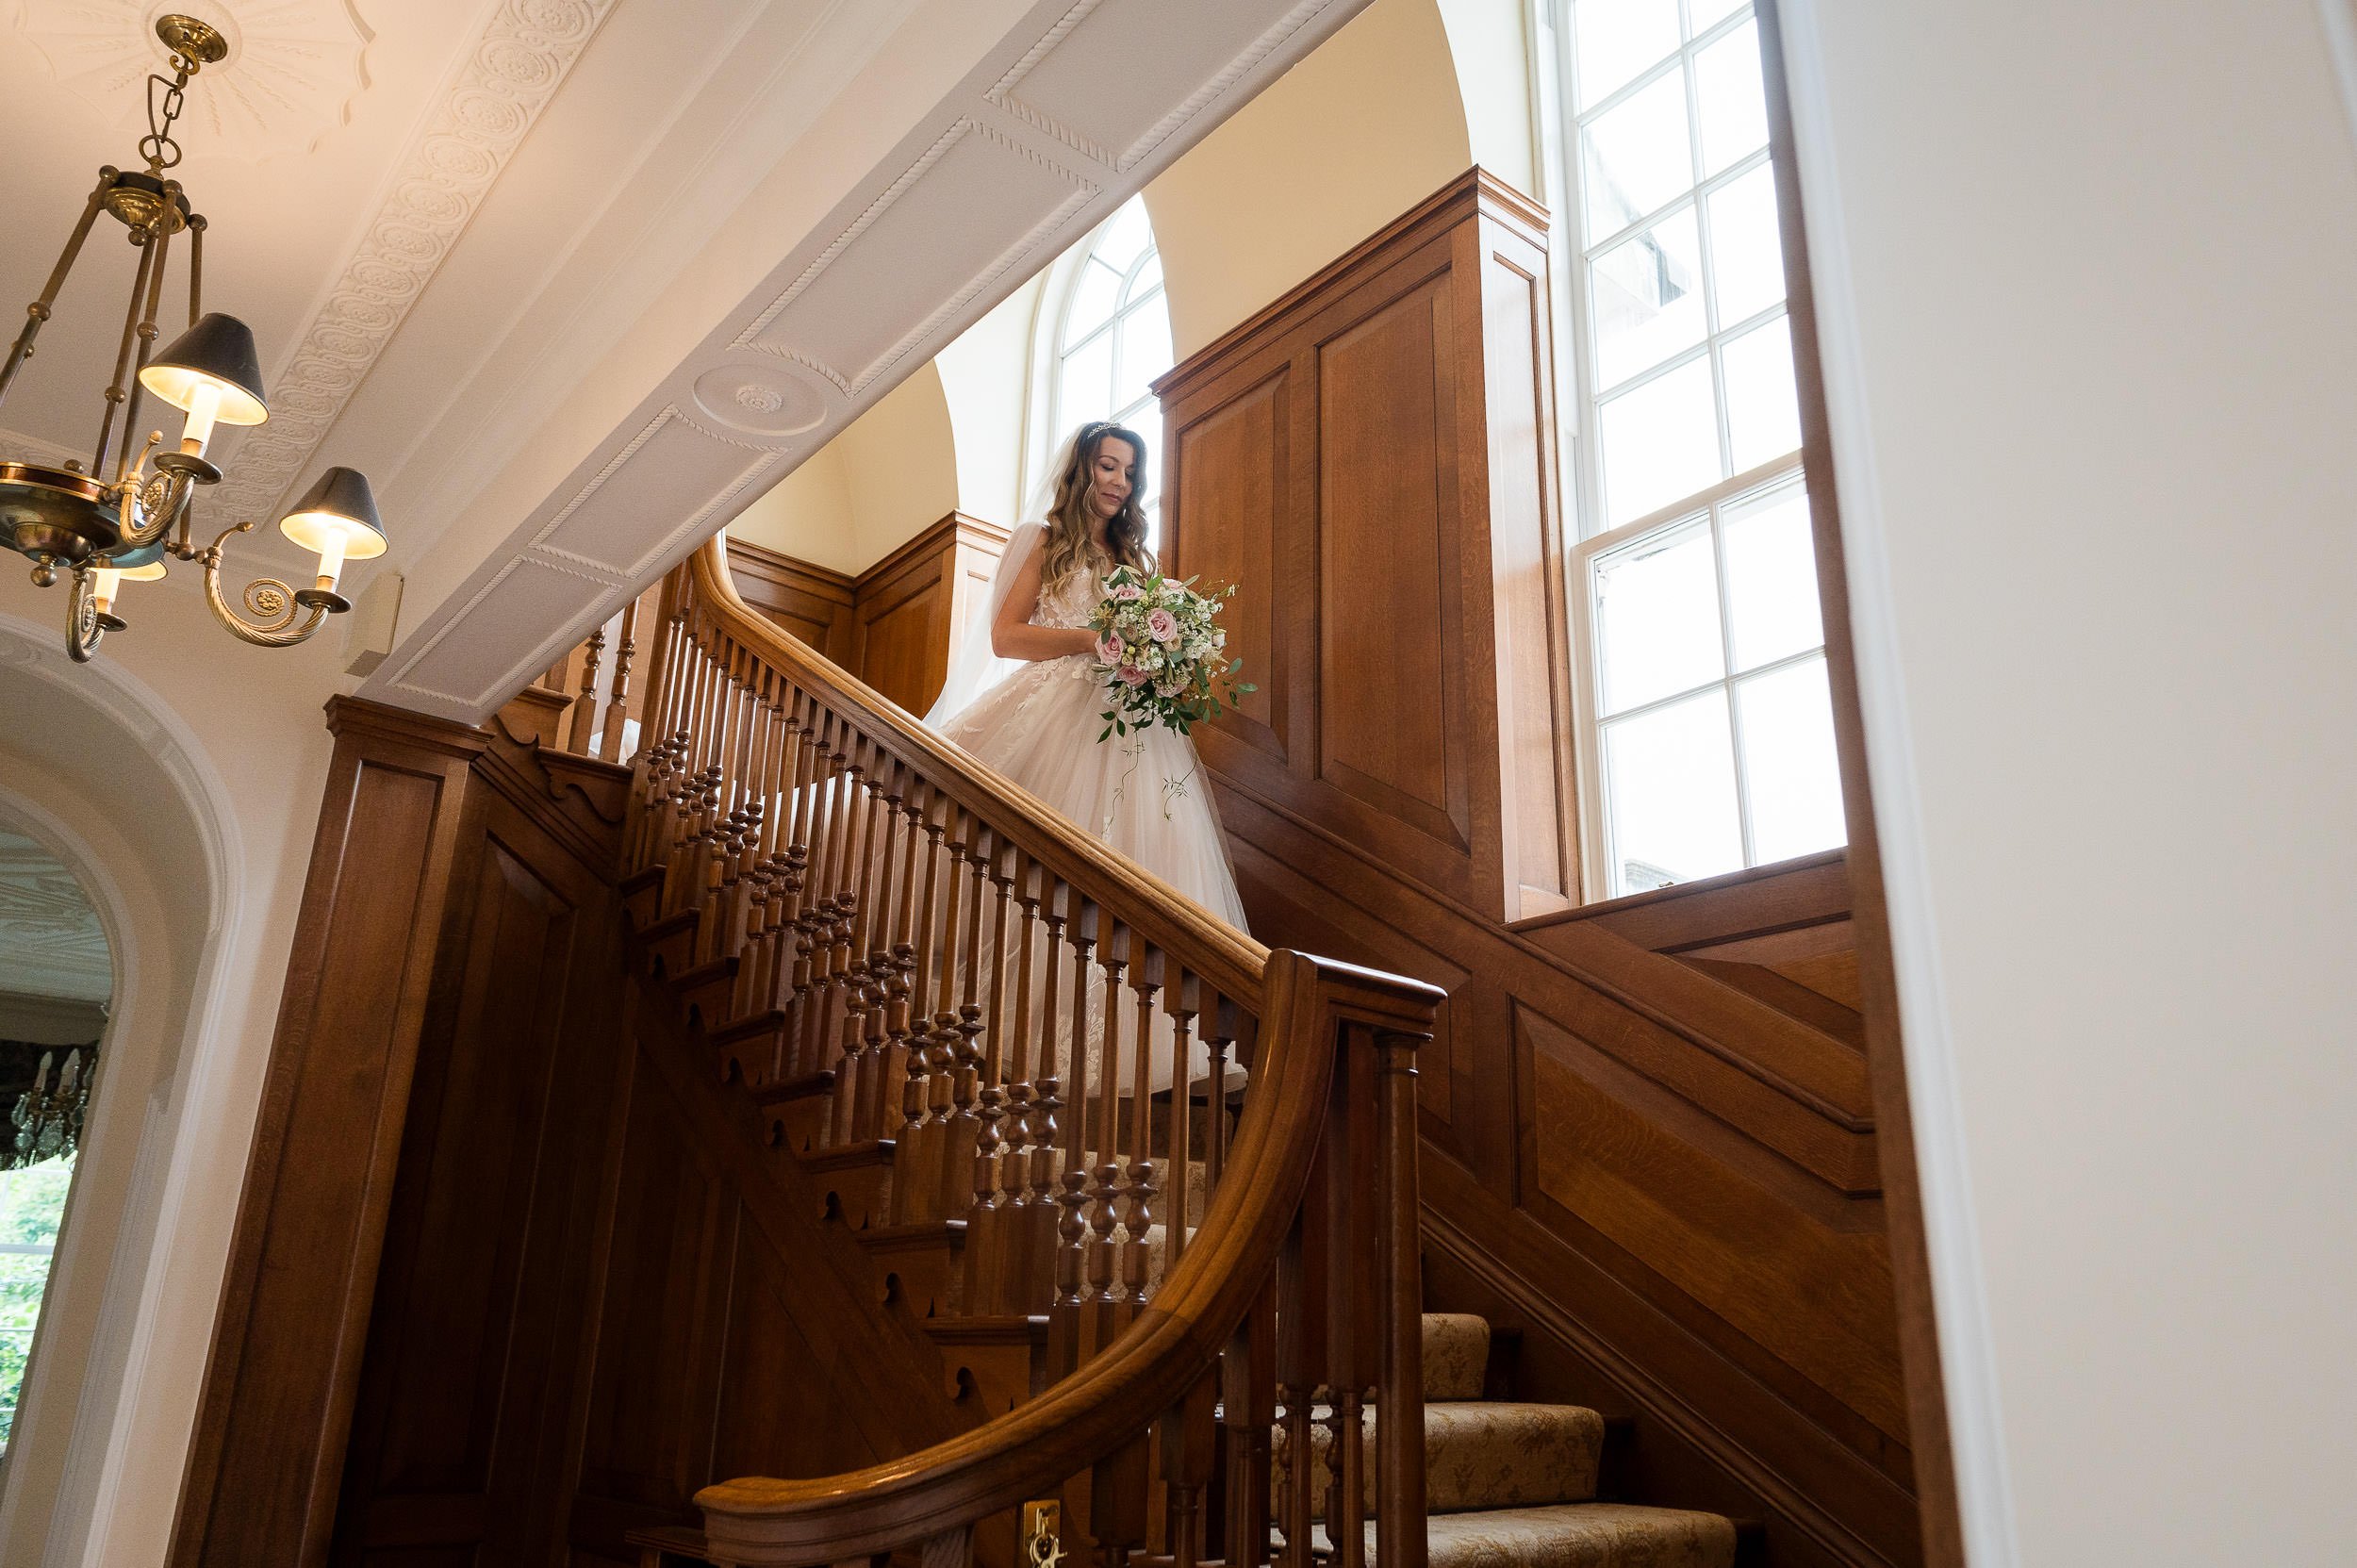 bride coming down the stairs at Hethfelton House wedding holding a bouquet